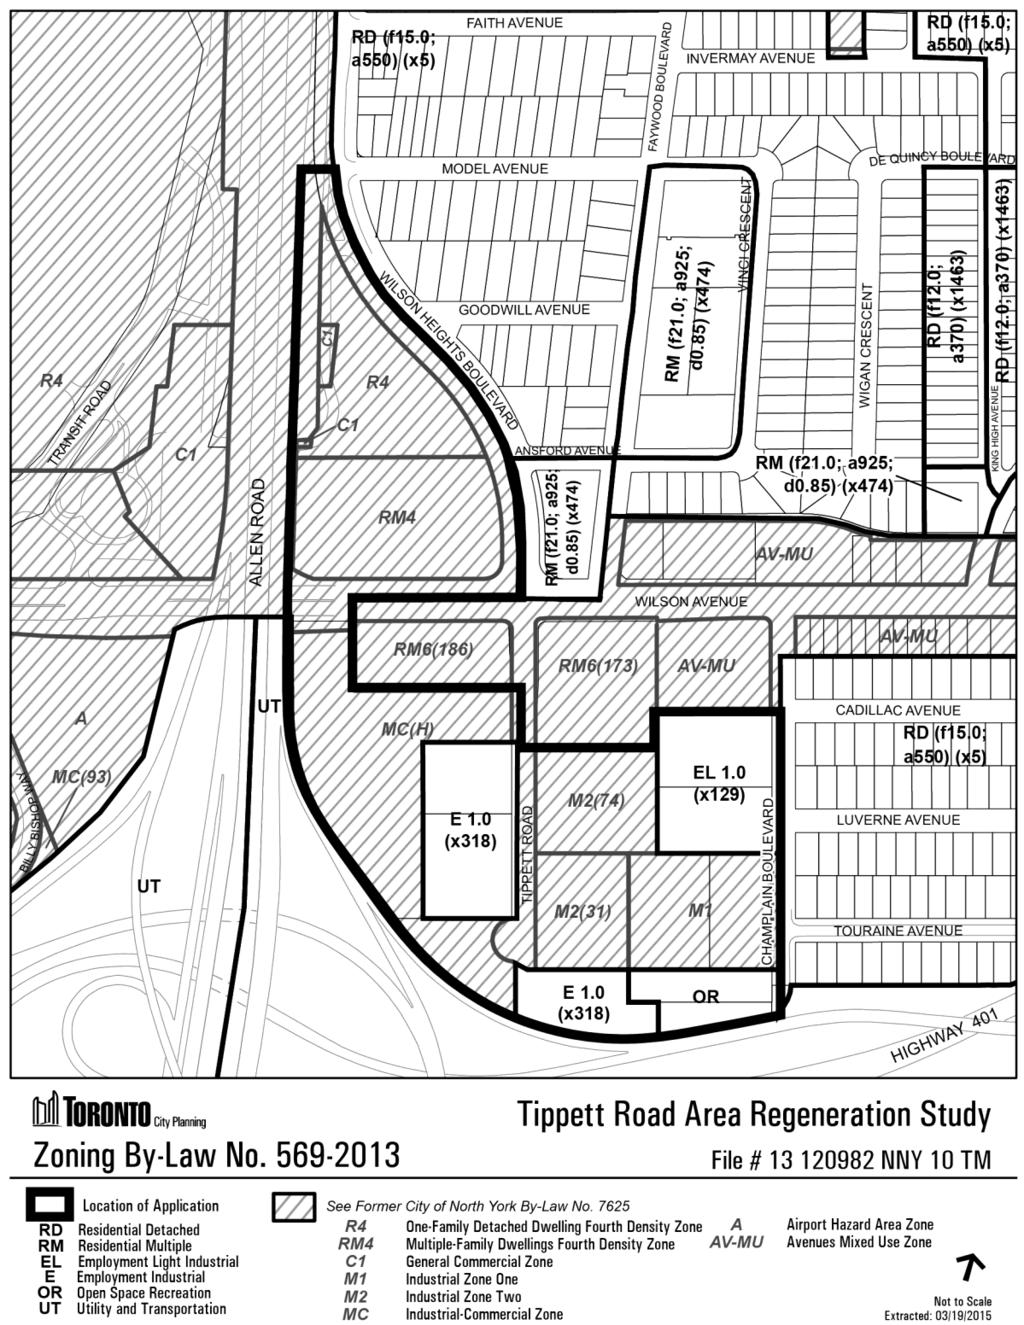 Attachment 6b: Zoning By-law 569-2013 Staff report for